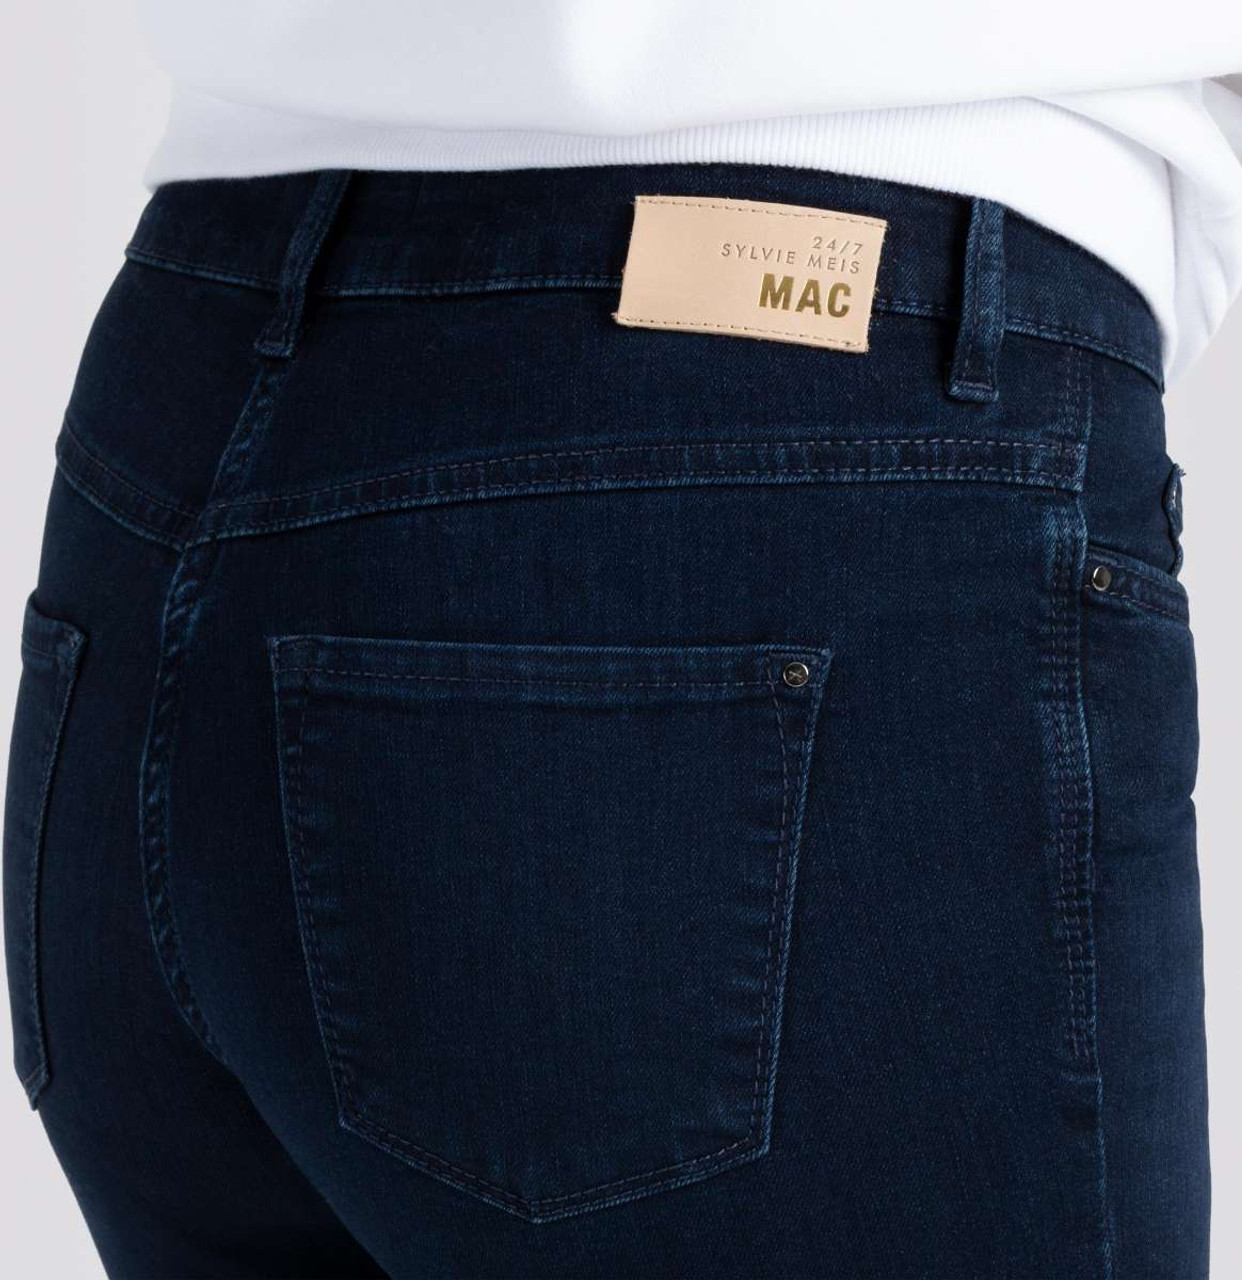 MAC X Dream Dark Skinny Blue Washed Jeans MEIS SYLVIE 24/7 Authentic in Basic